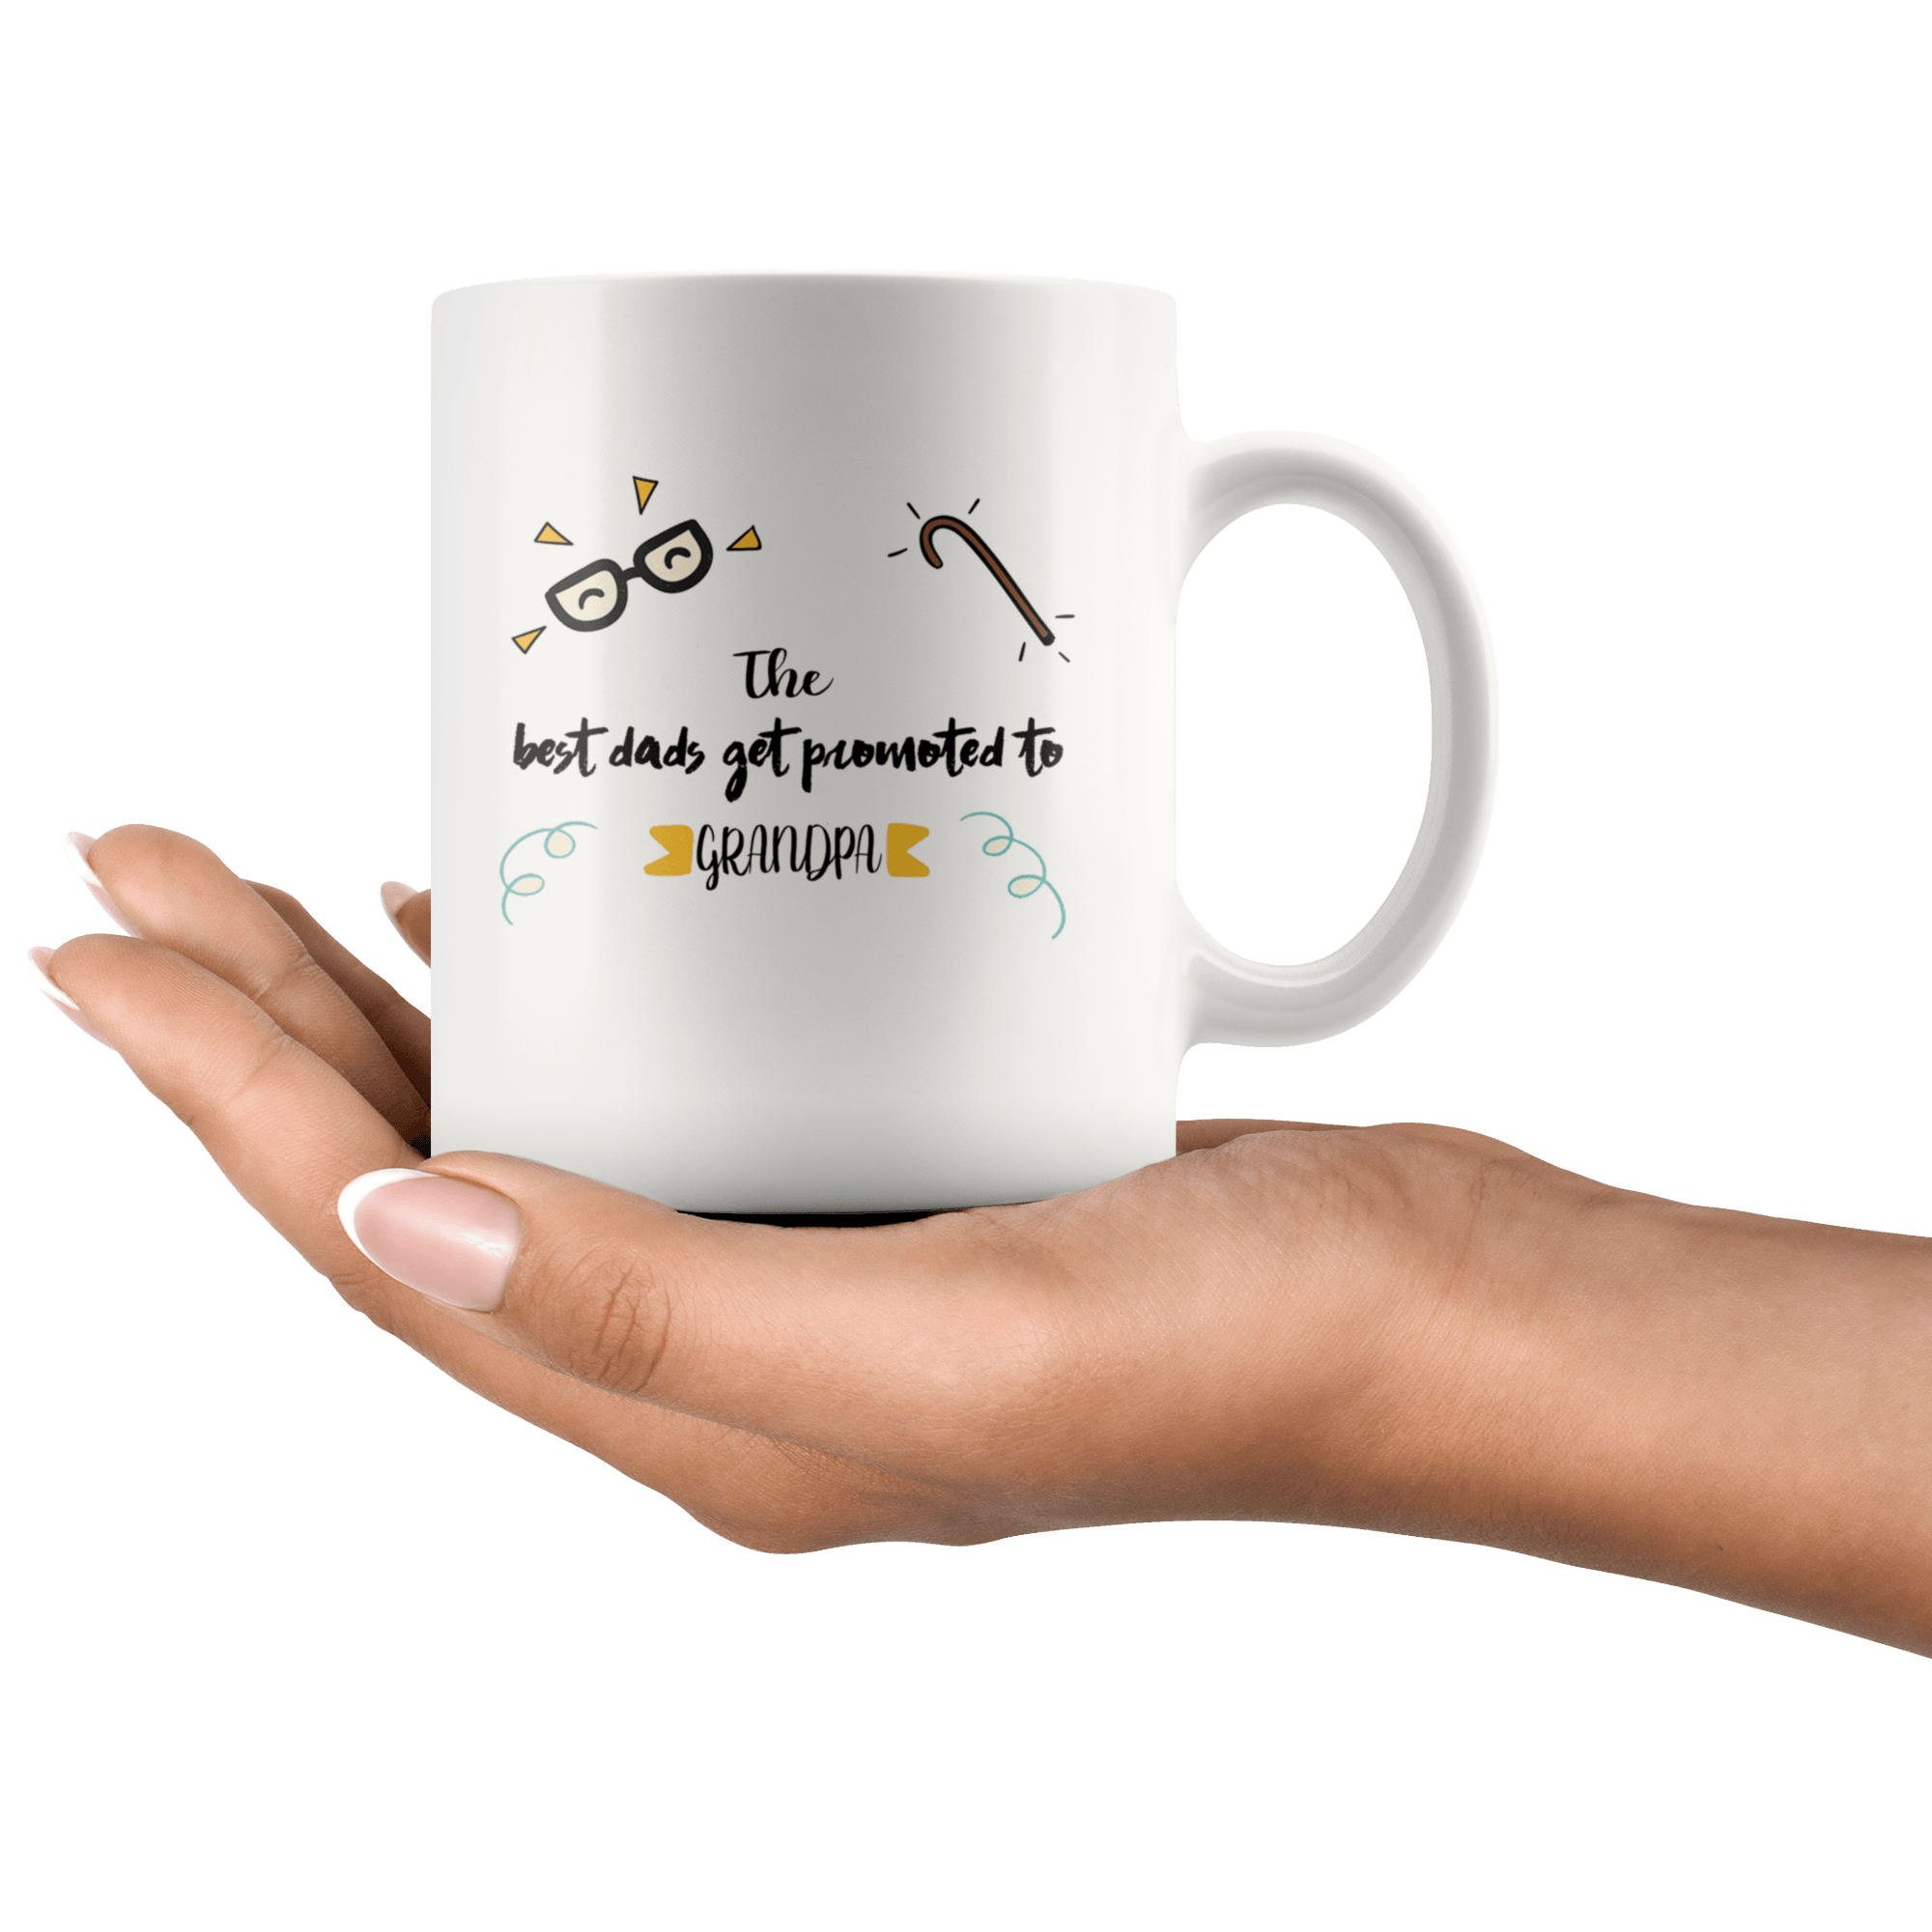 Great Coffee Mug For Grandfather - The Best Dads Get Promoted To Grandpa - SPCM